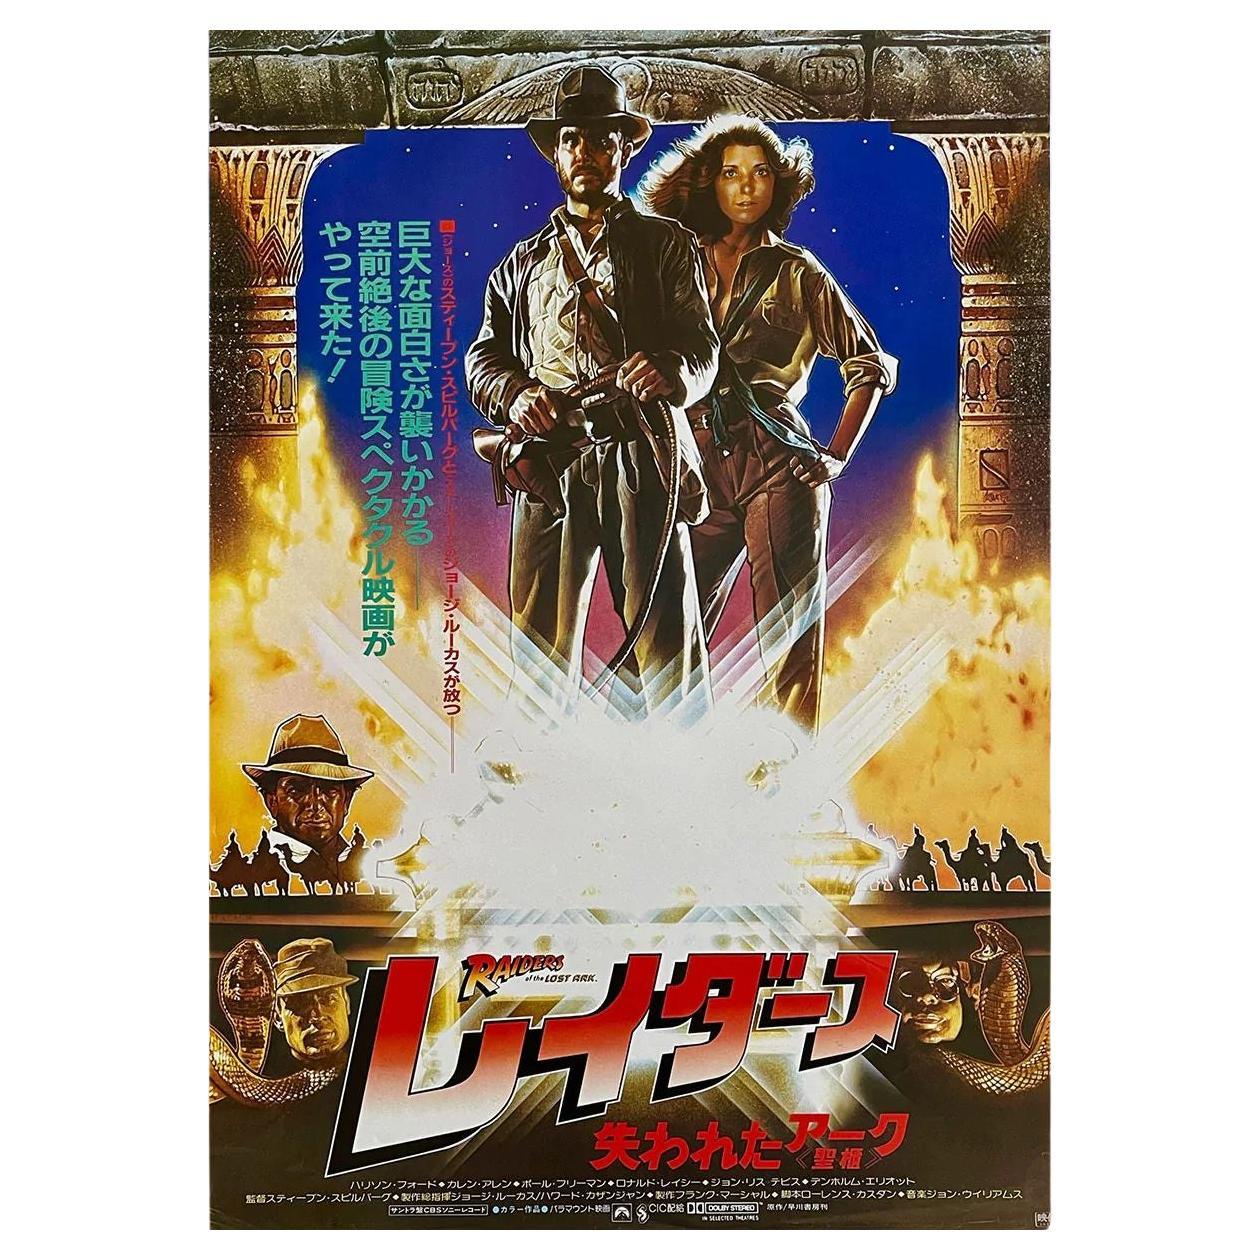 Raiders of Lost Ark, Unframed Poster, 1981 For Sale